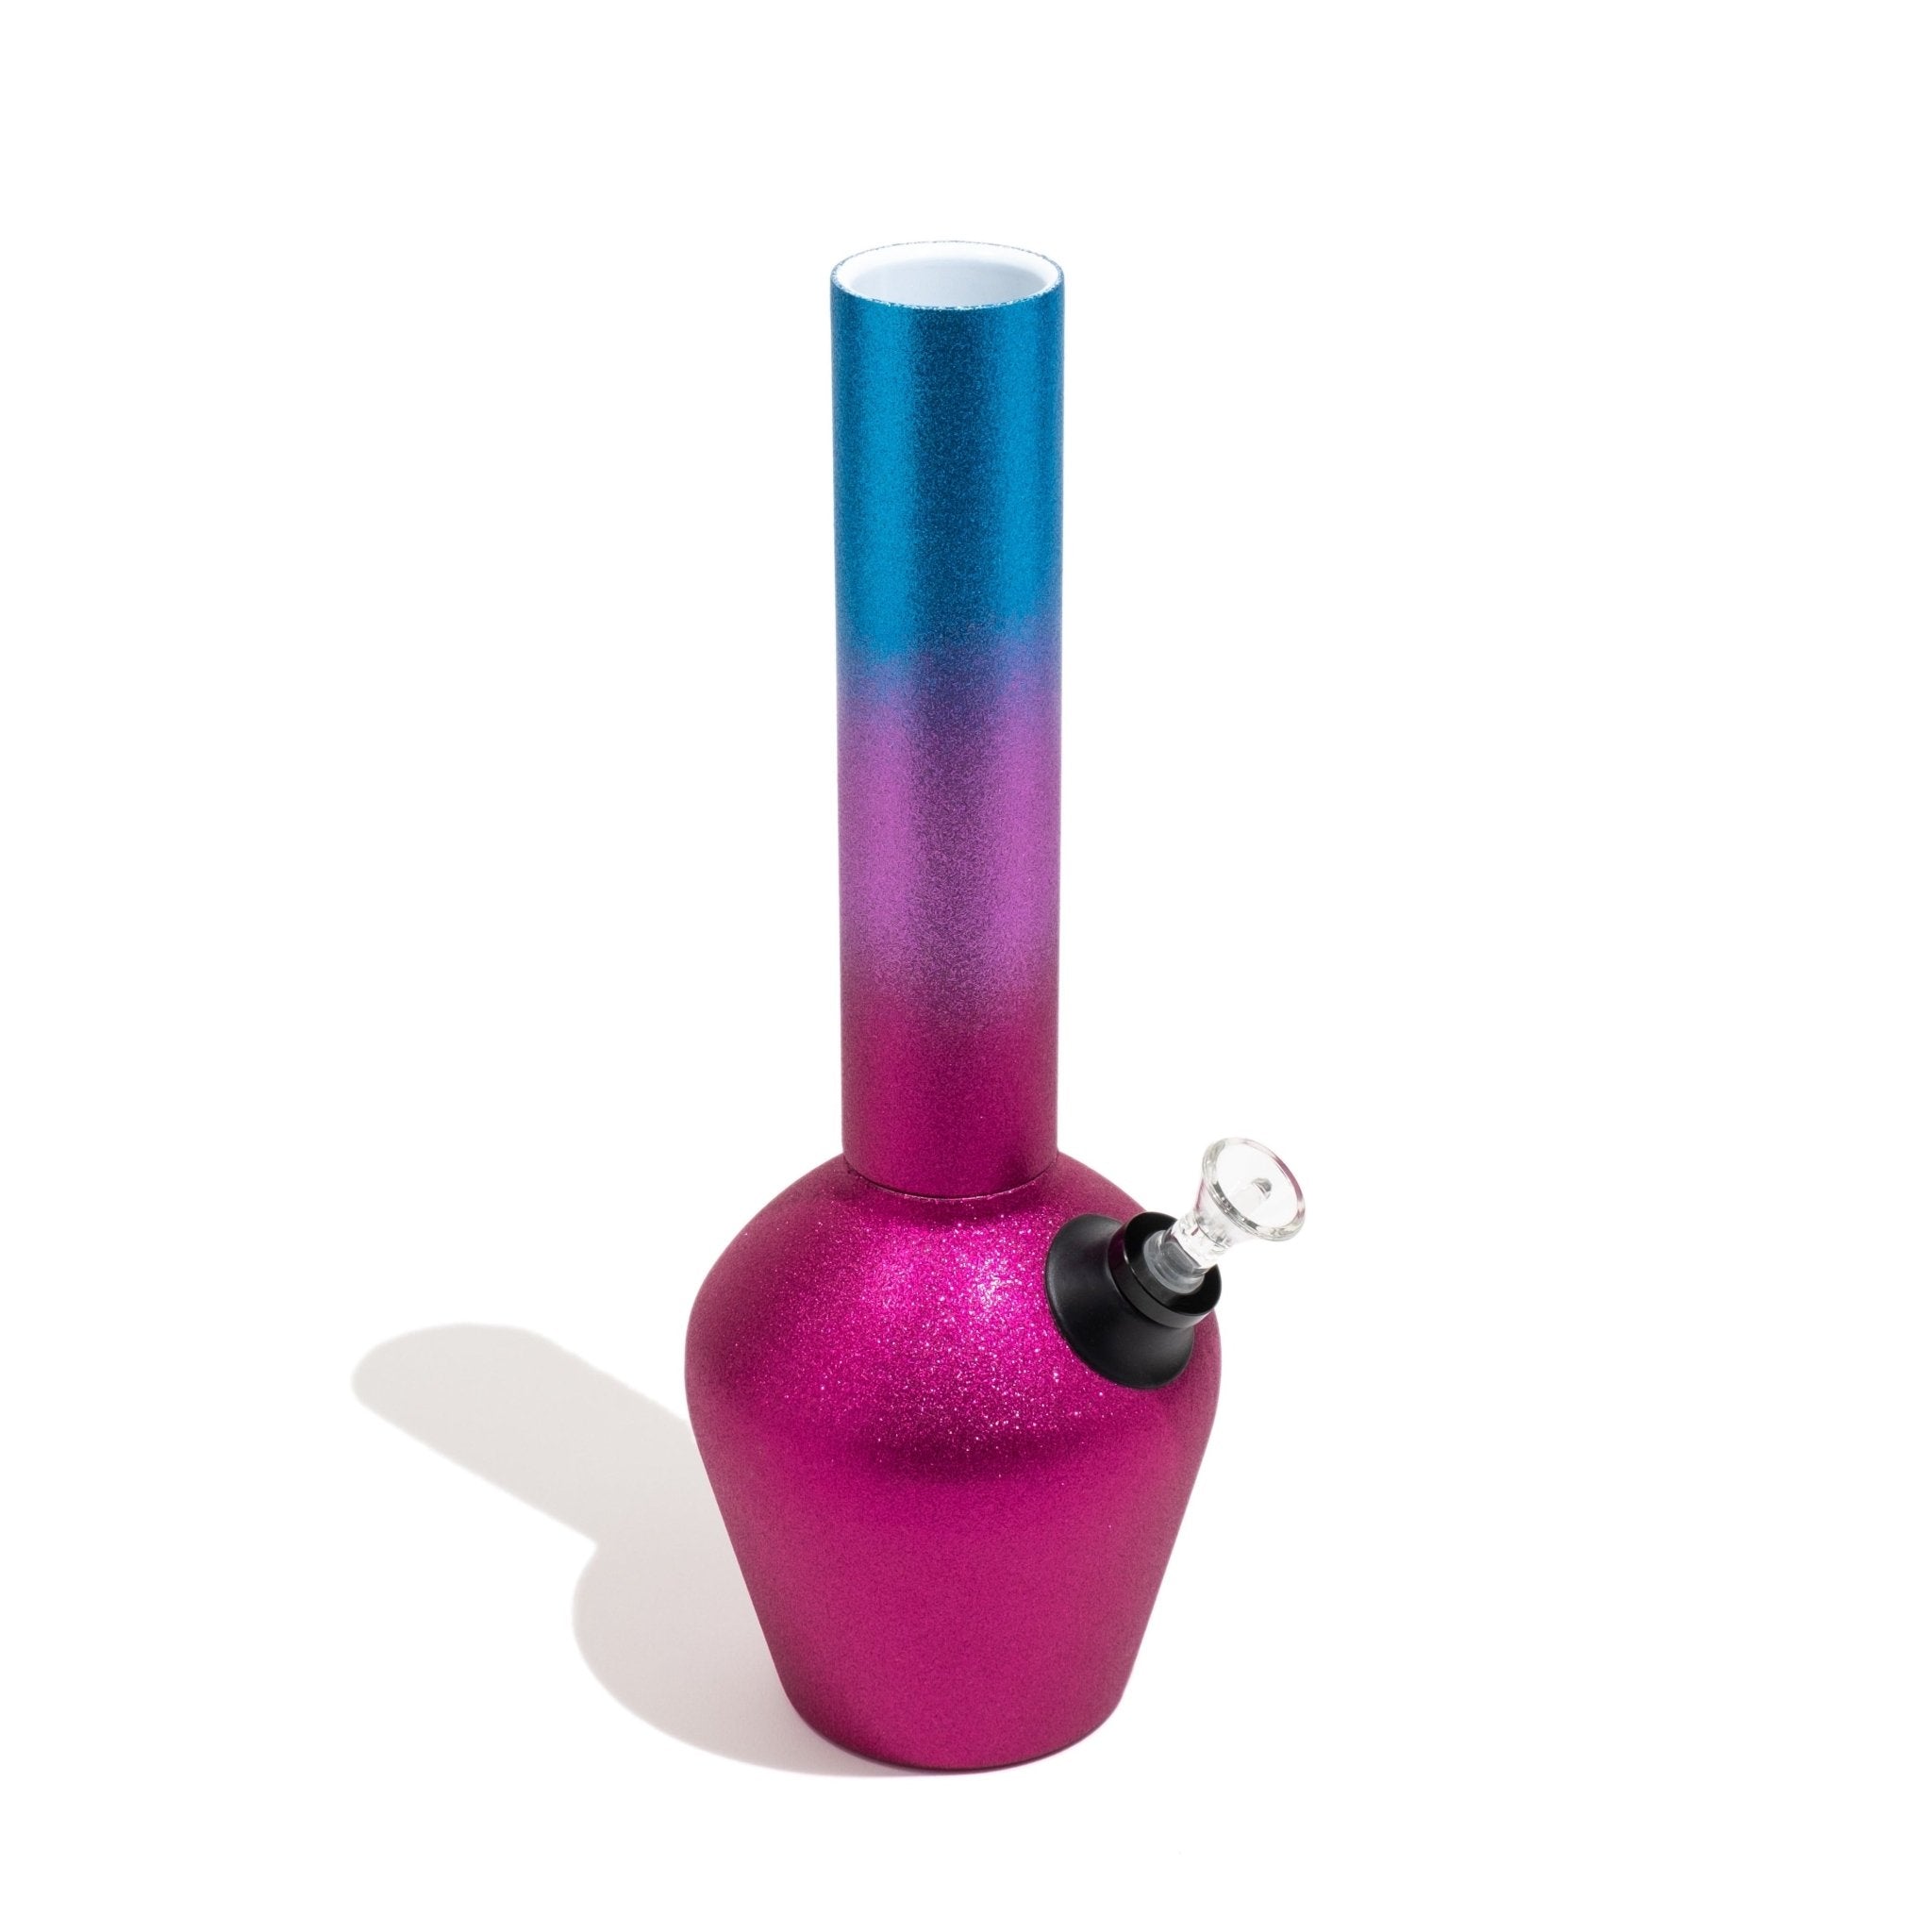 Chill - Limited Edition - Cotton Candy Glitterbomb - Glasss Station